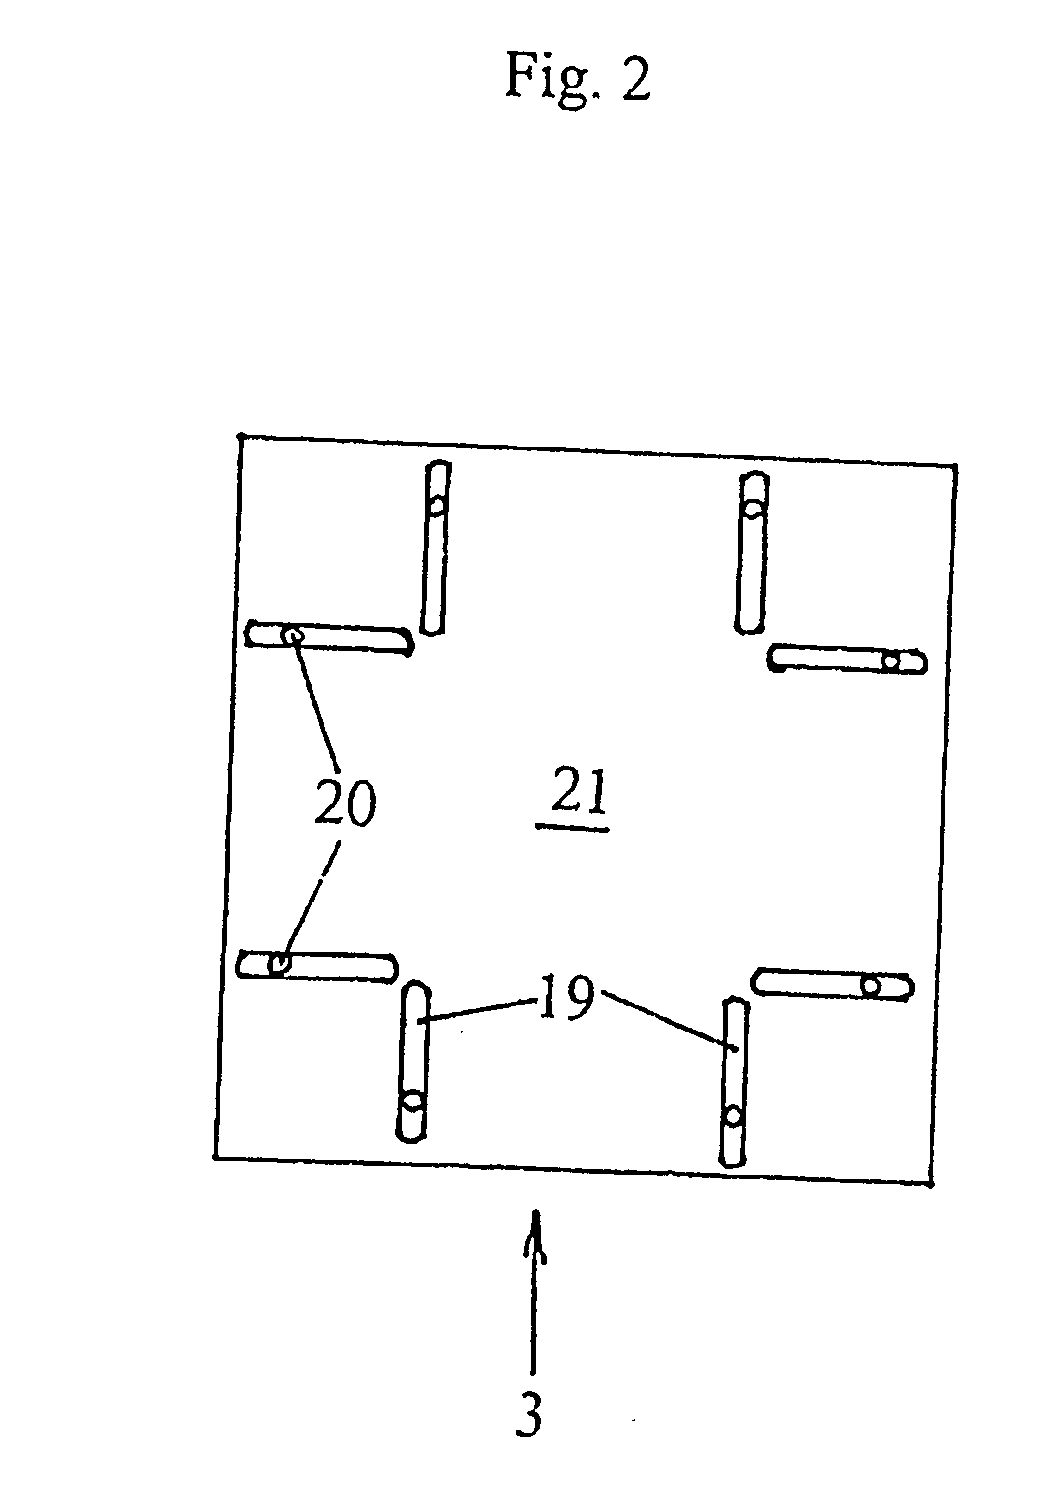 Apparatus for the processing of photovoltaic cells